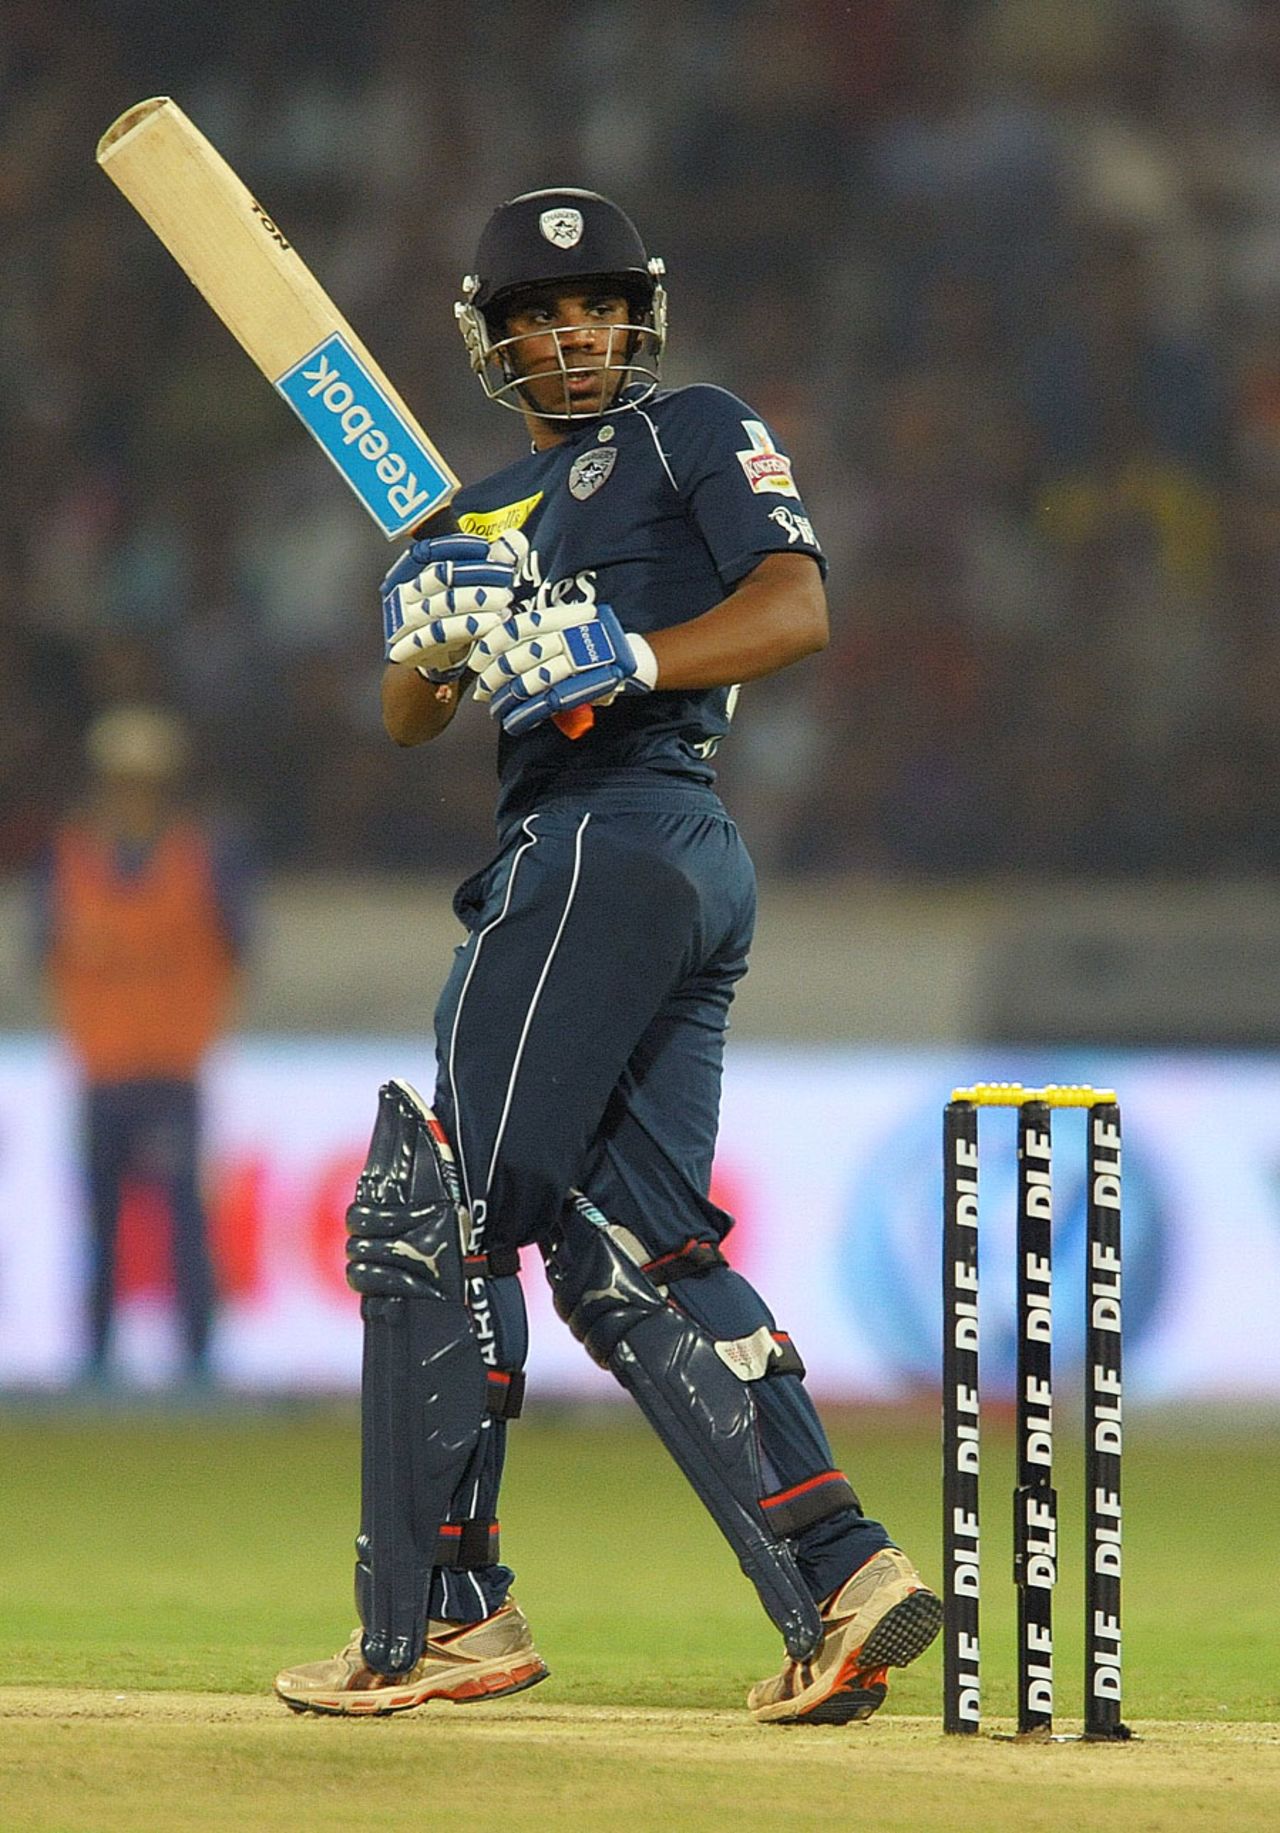 Akshath Reddy made 42 at the top of the order for Chargers, Deccan Chargers v Rajasthan Royals, IPL 2012, Hyderabad, May 18, 2012